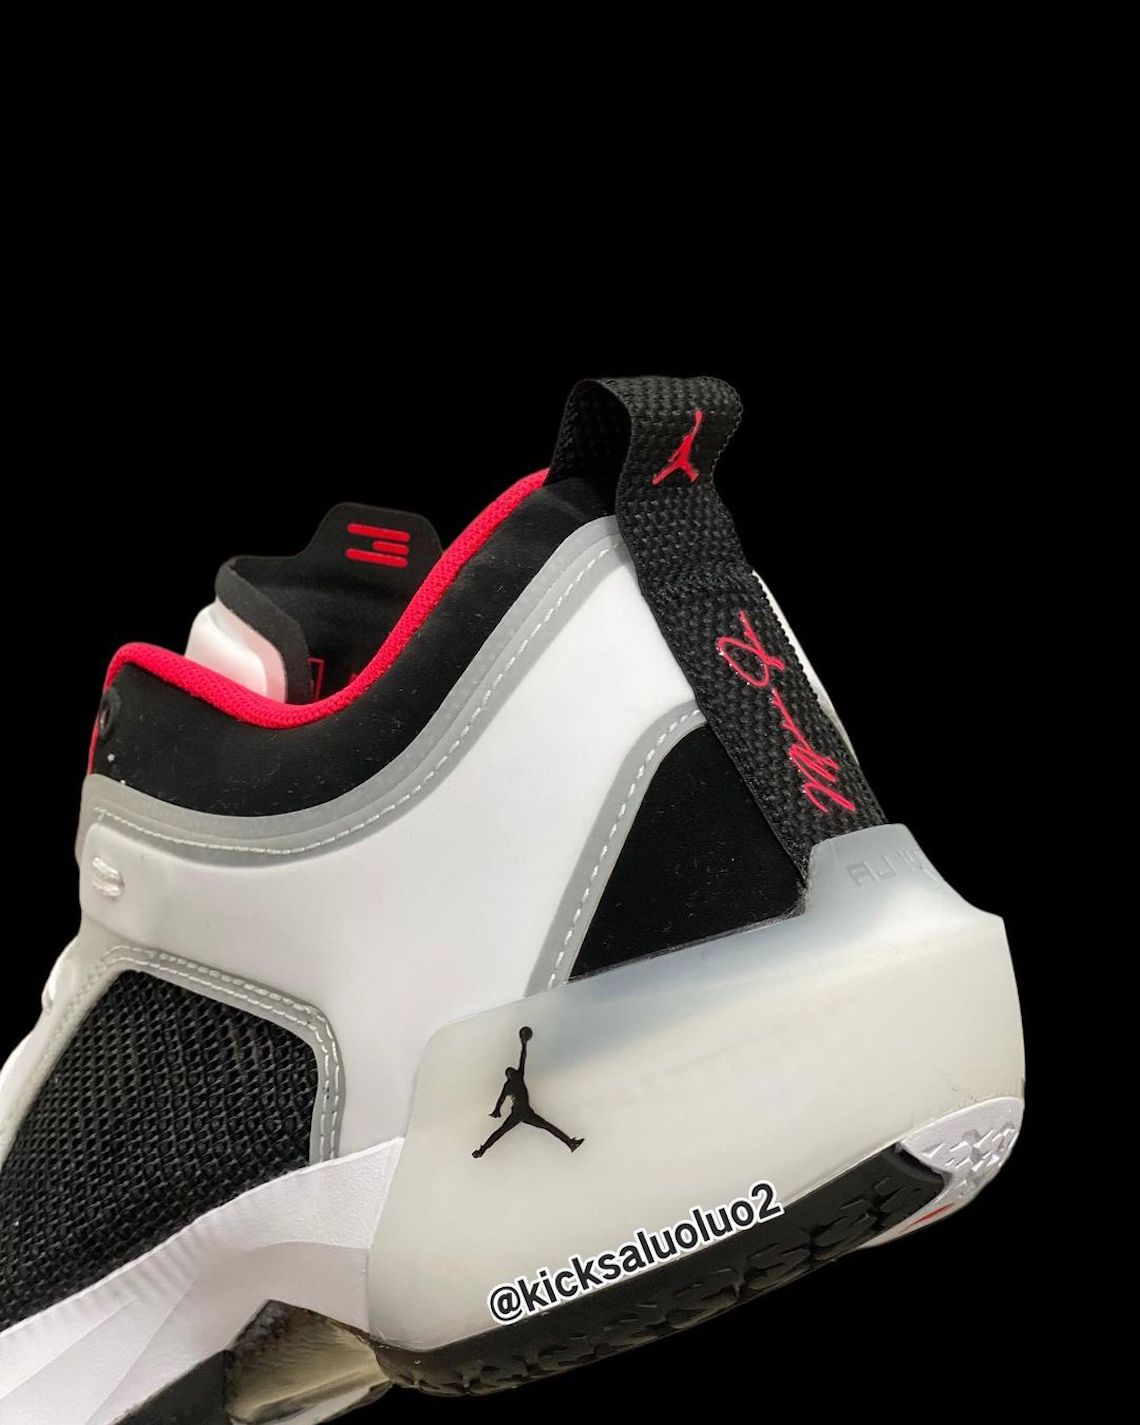 Dropping alongside the rest of the Jordan Bordeaux clothing collection which also includes the White Black Red 06